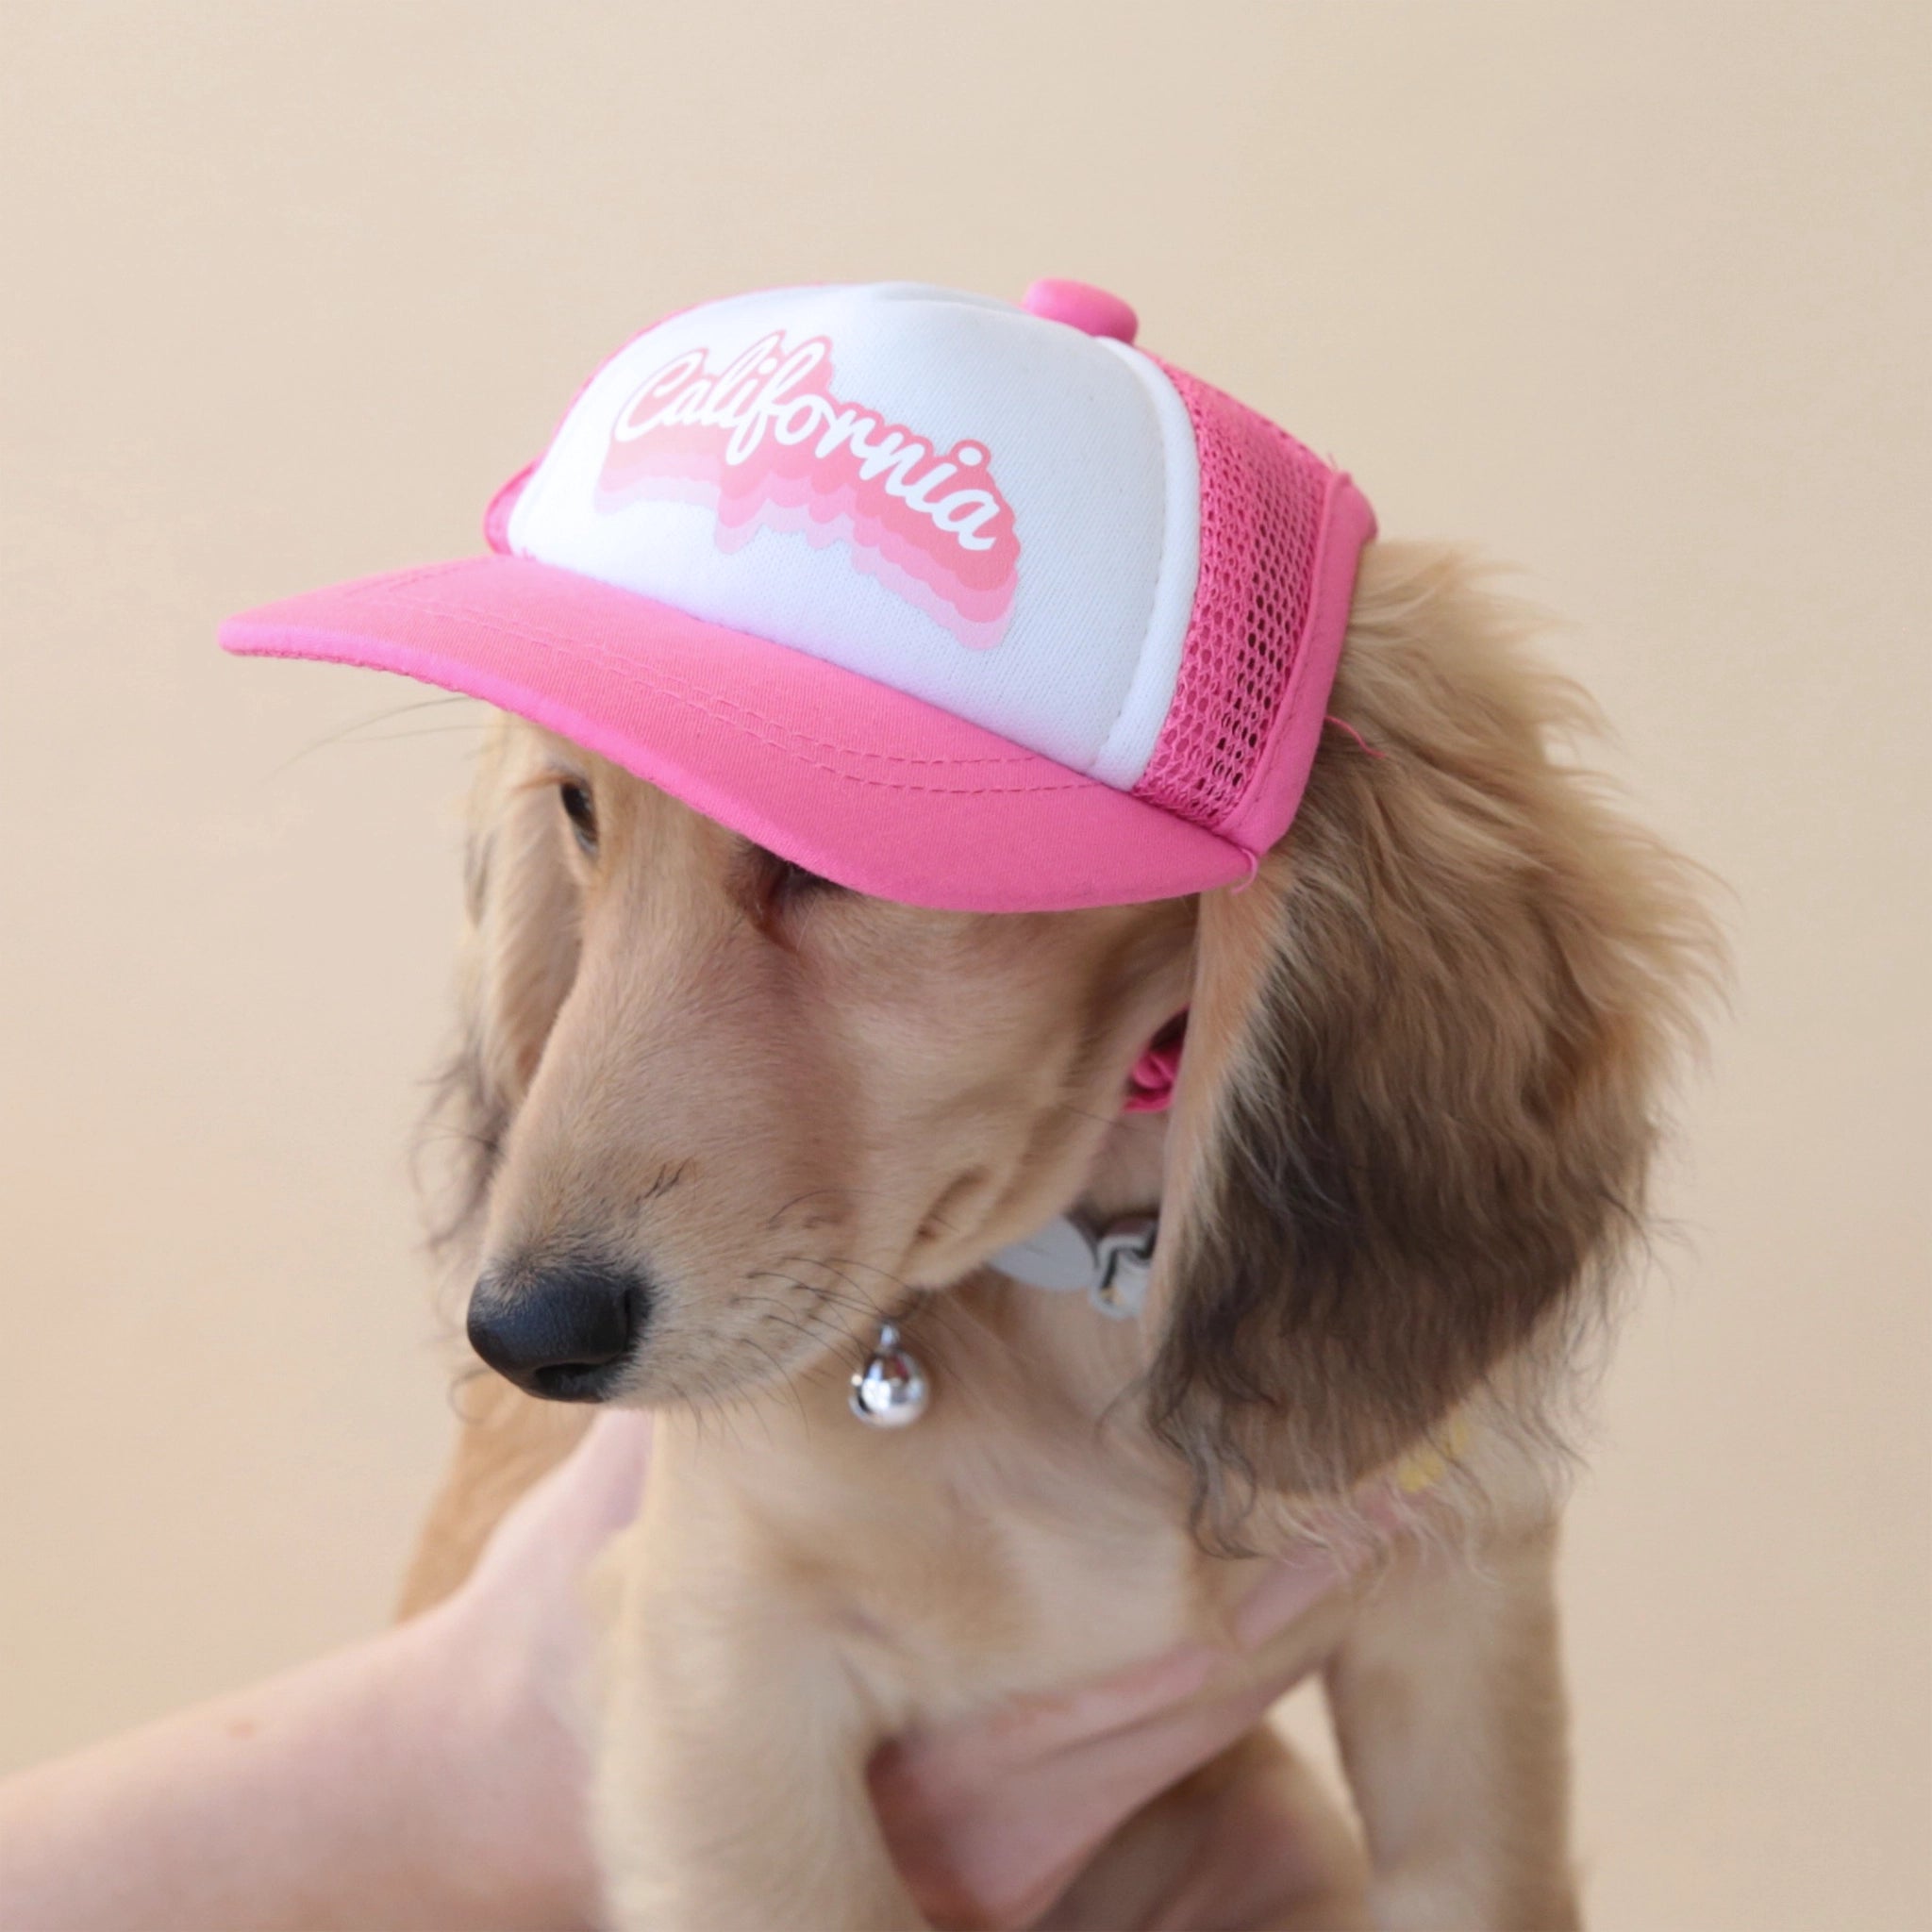 A wiener dog modeling a pink and white baseball hat with a white hat, and a pink bill and mesh backing along with pink outlined text that reads, &quot;California&quot; on the front.